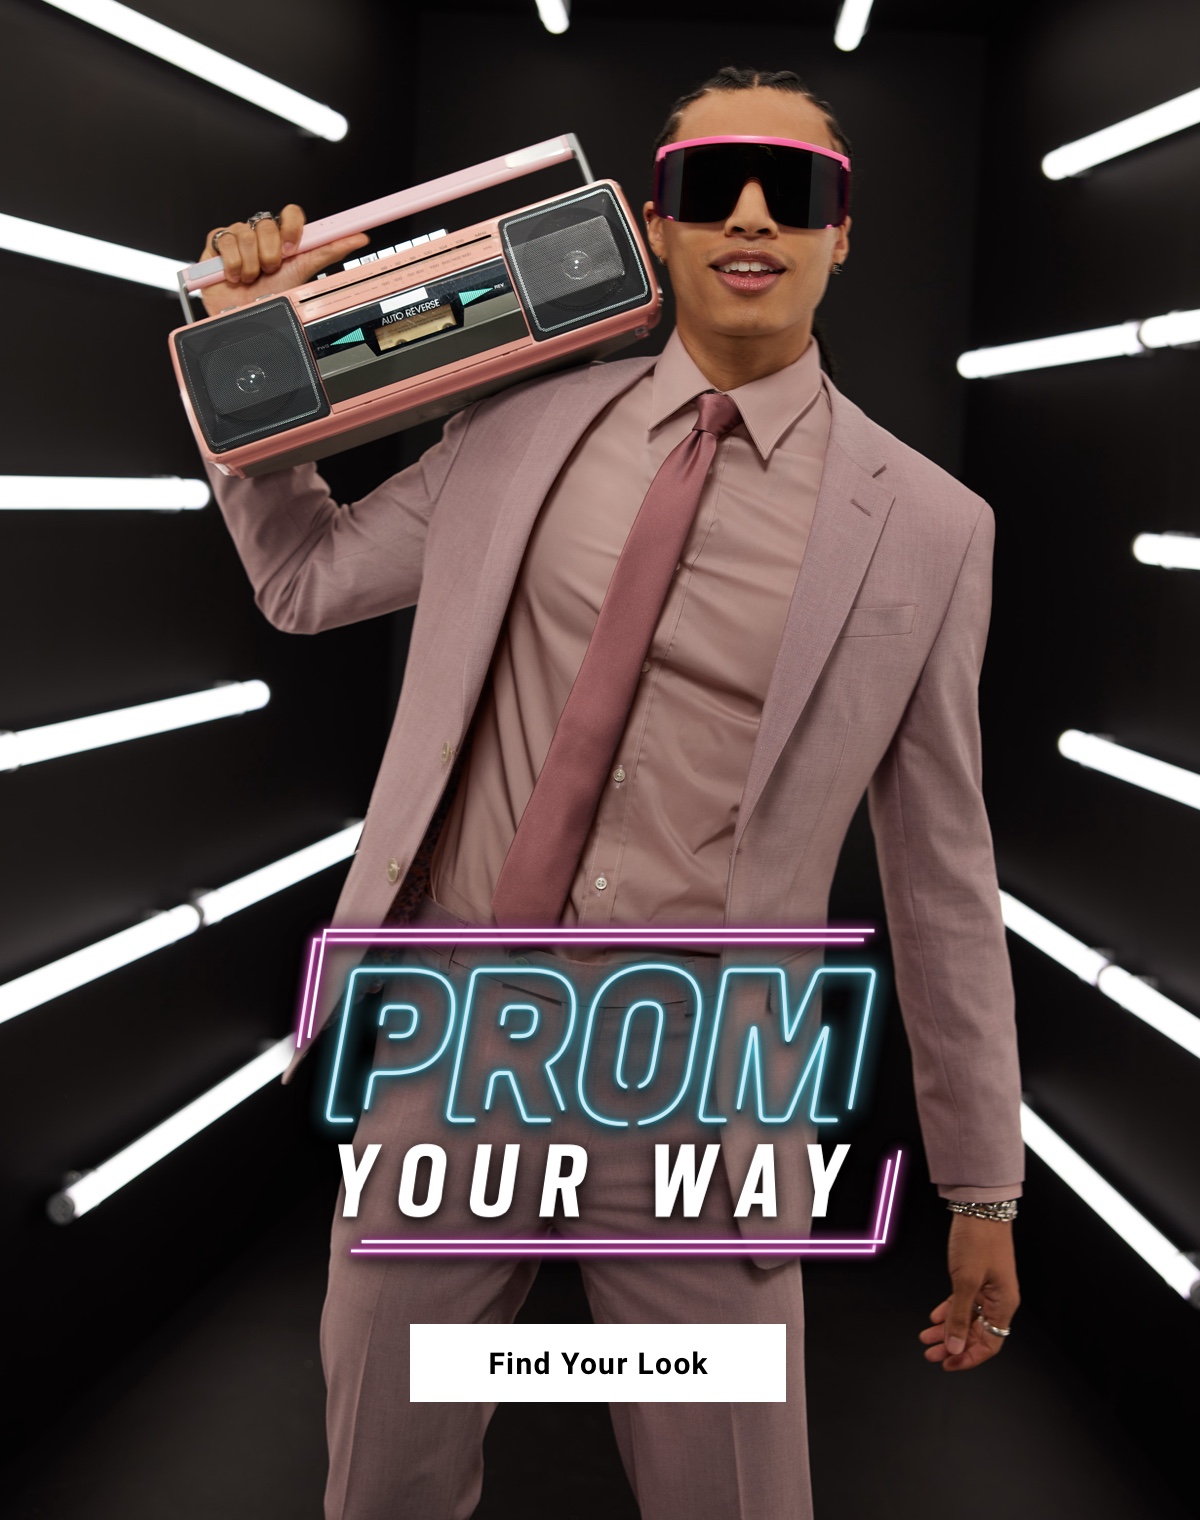 Prom Your Way CTA: Find You Look